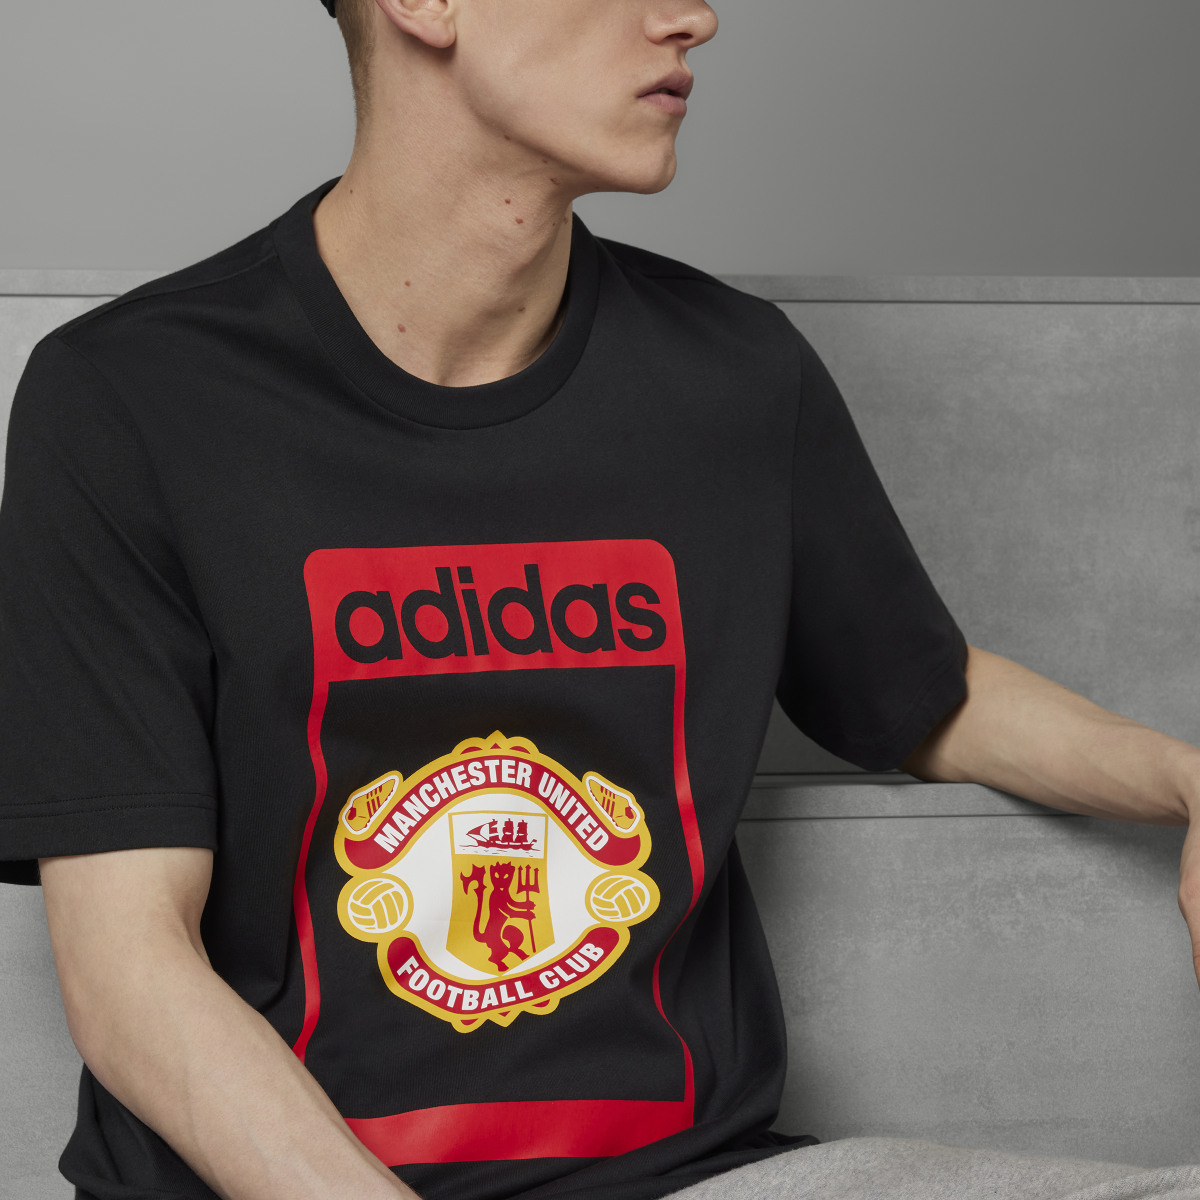 Adidas Manchester United OG Graphic Tee. 6